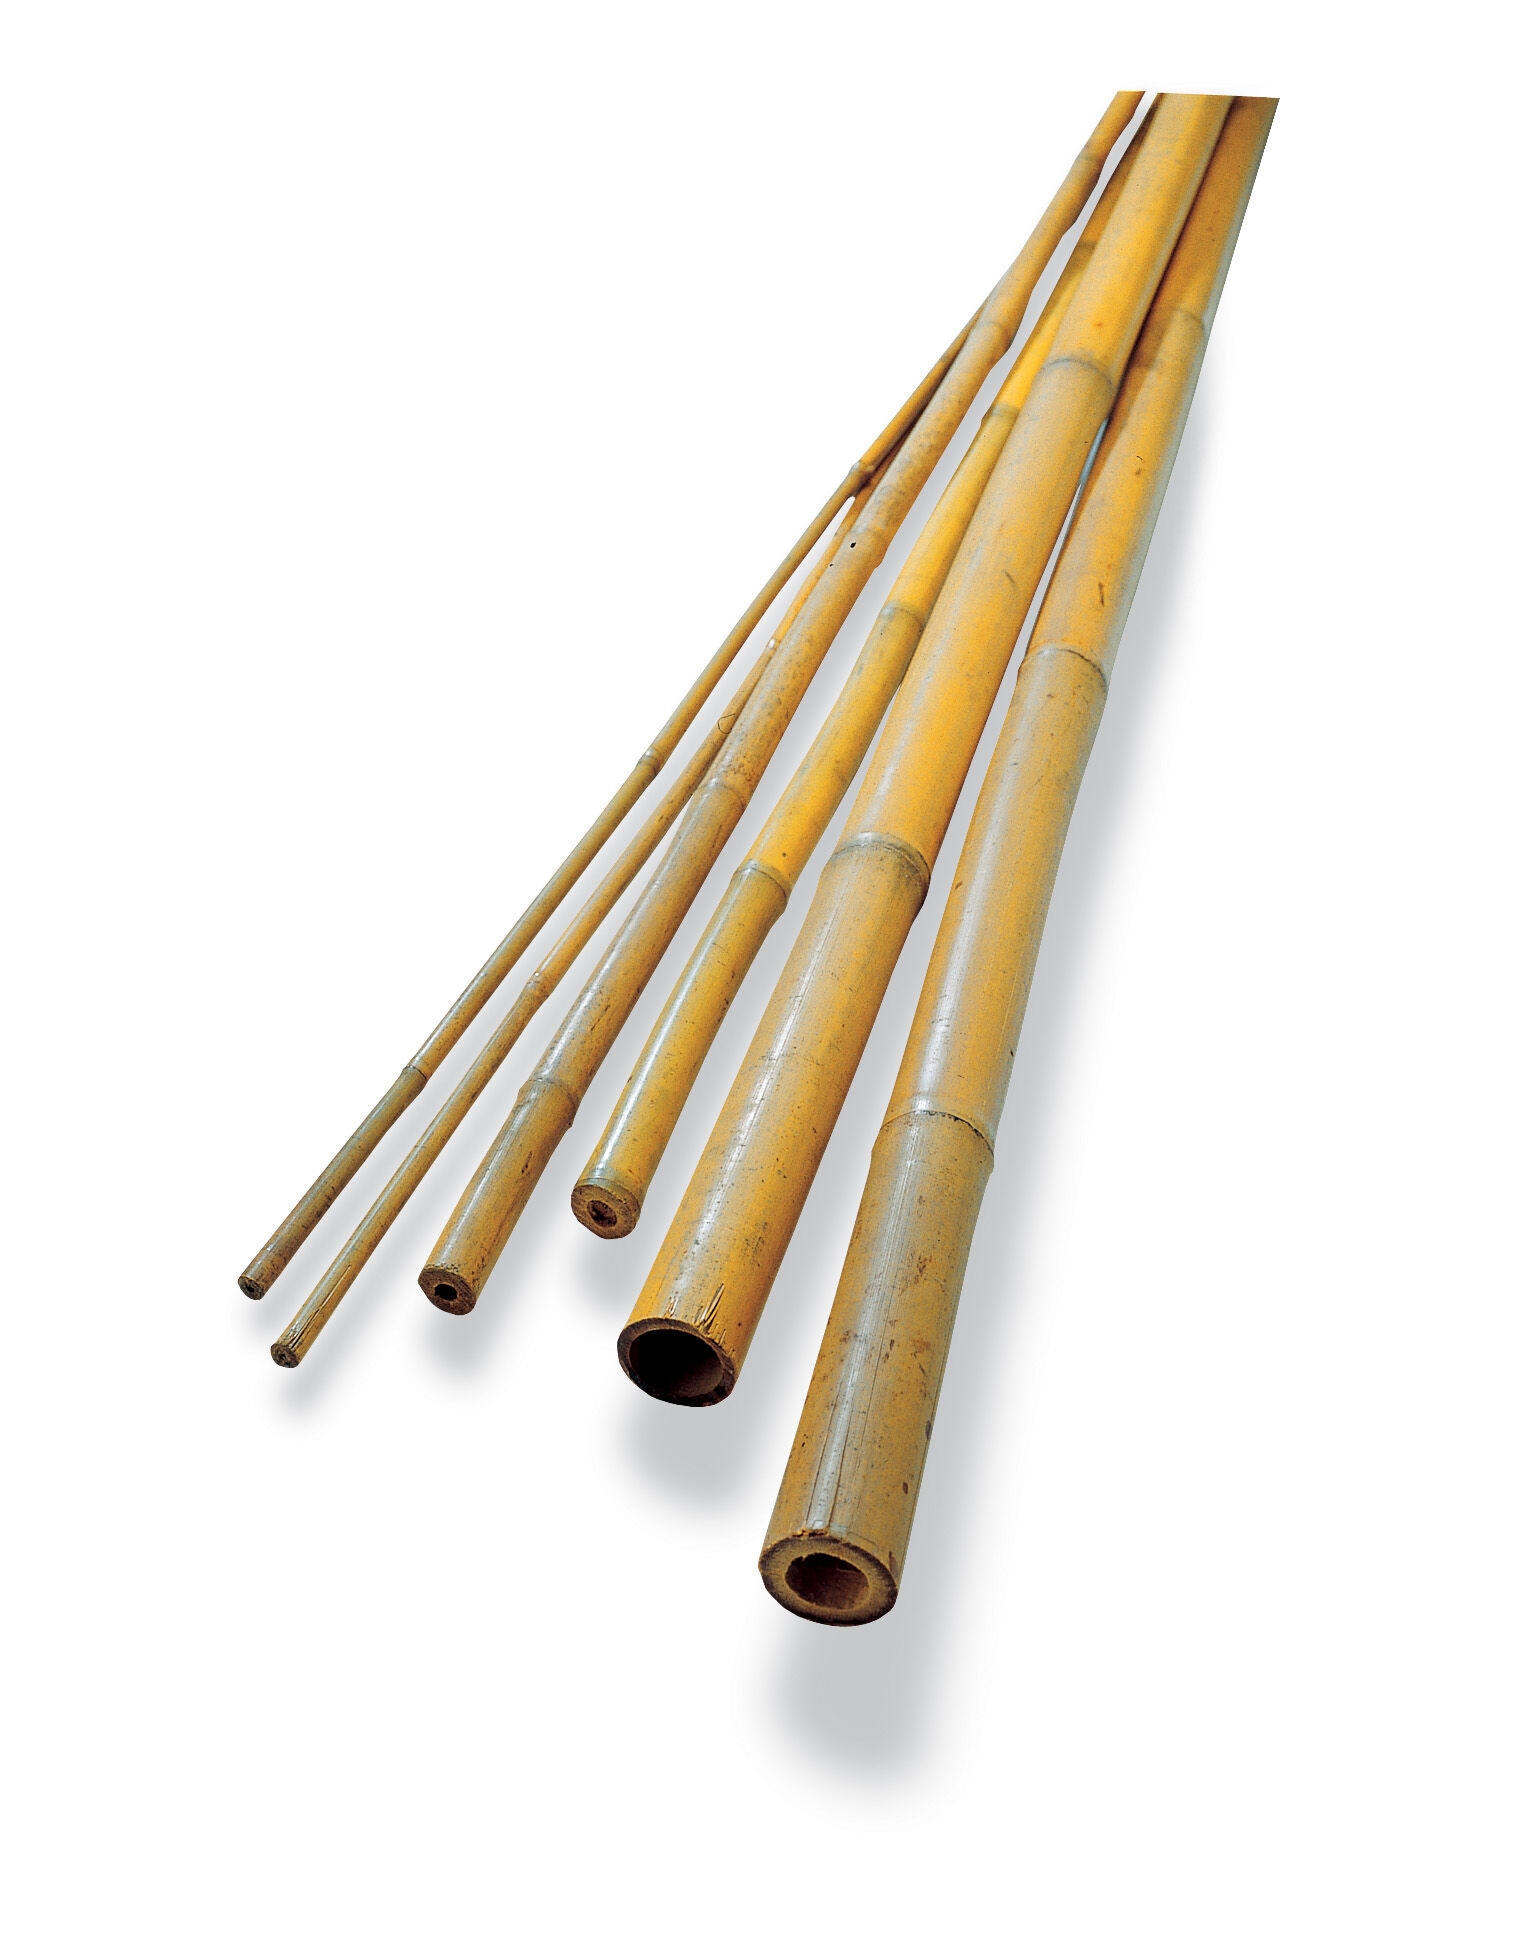 4ft\5ft\6ft Wooden Bamboo Support Canes Garden Poles Stakes Sticks 12mm-16mm 